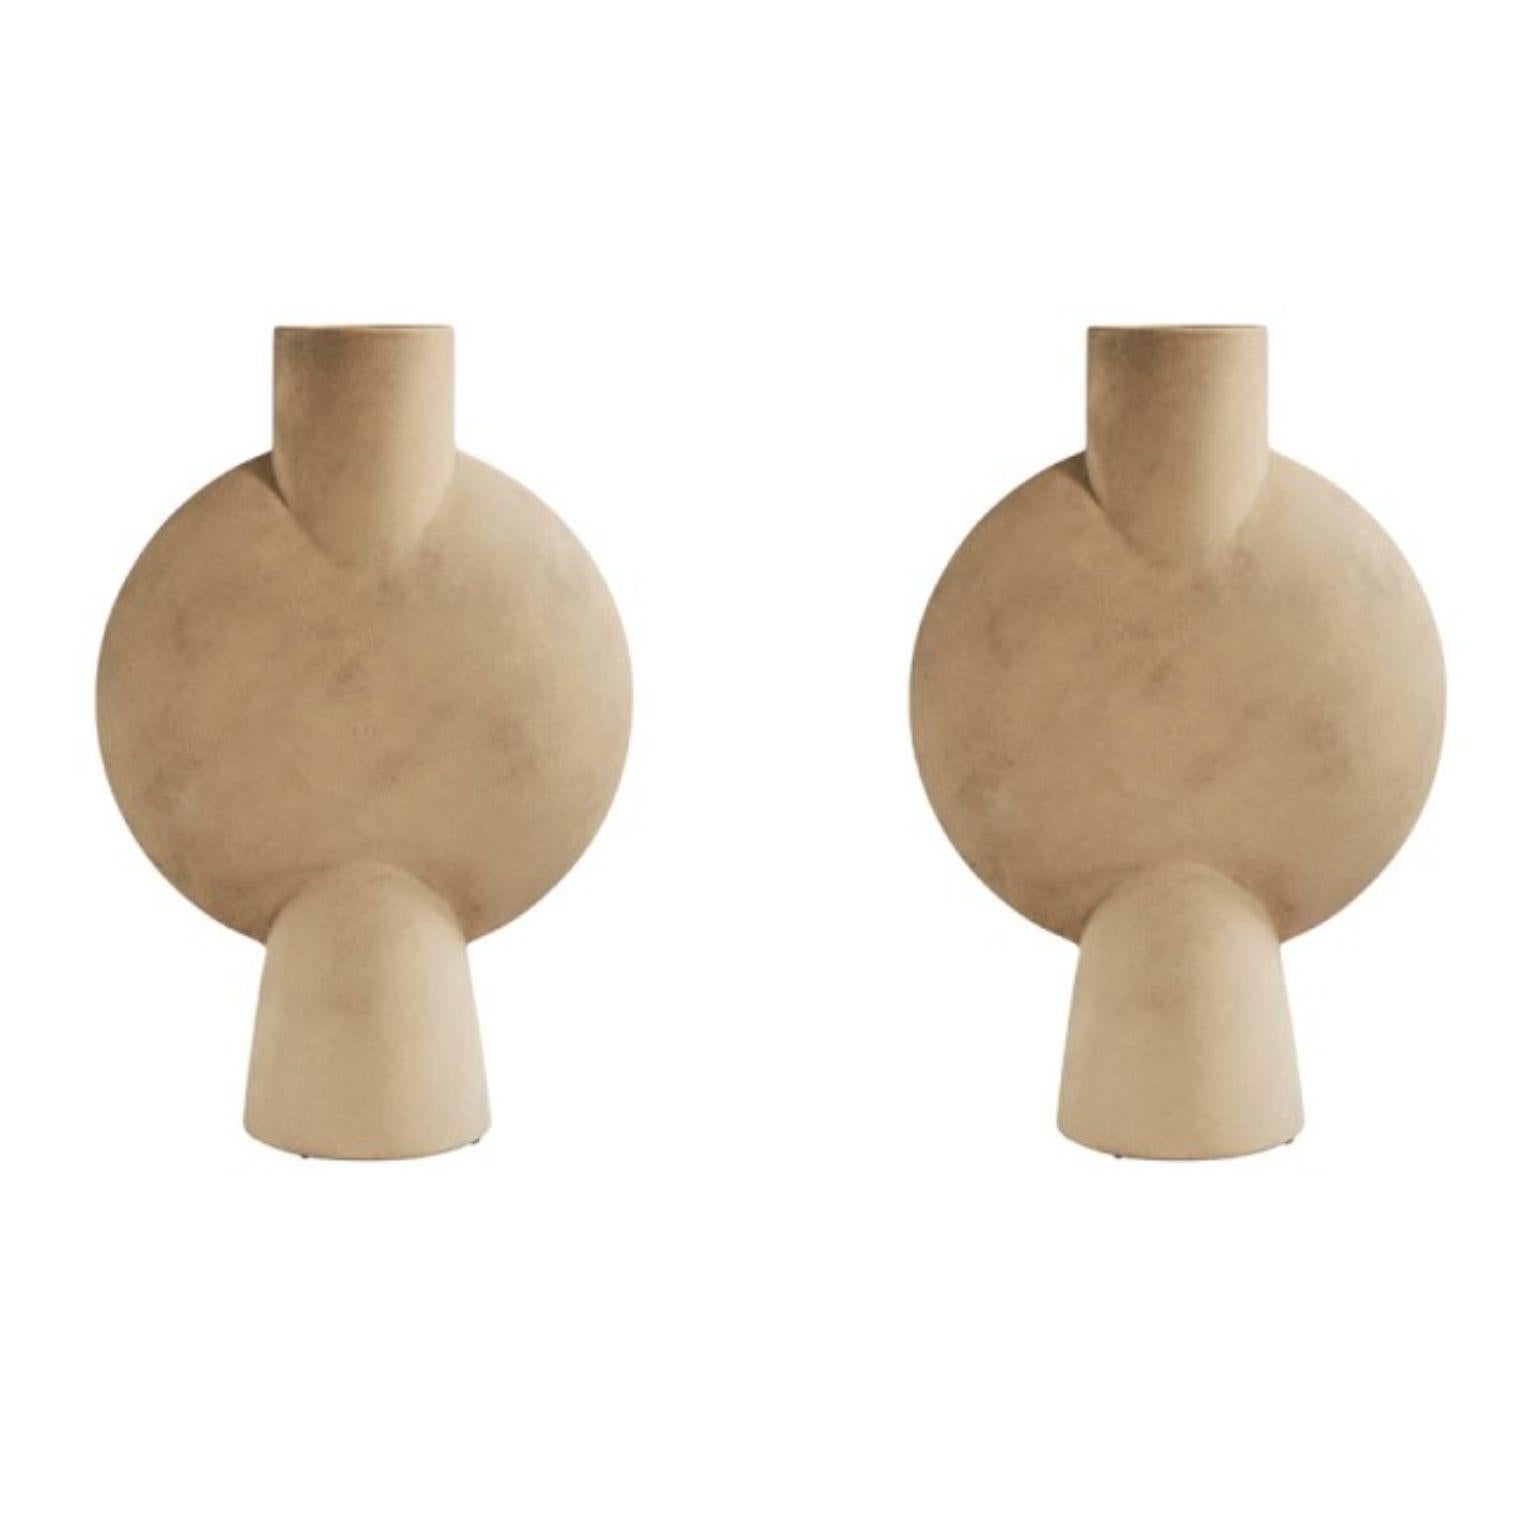 Set of 2 sand sphere vases bubl hexa by 101 Copenhagen
Designed by Kristian Sofus Hansen & Tommy Hyldahl
Dimensions: L42 / W18,5 / H60 cm
Materials: Ceramic

The Sphere collection celebrates unique silhouettes and textures that makes an impact